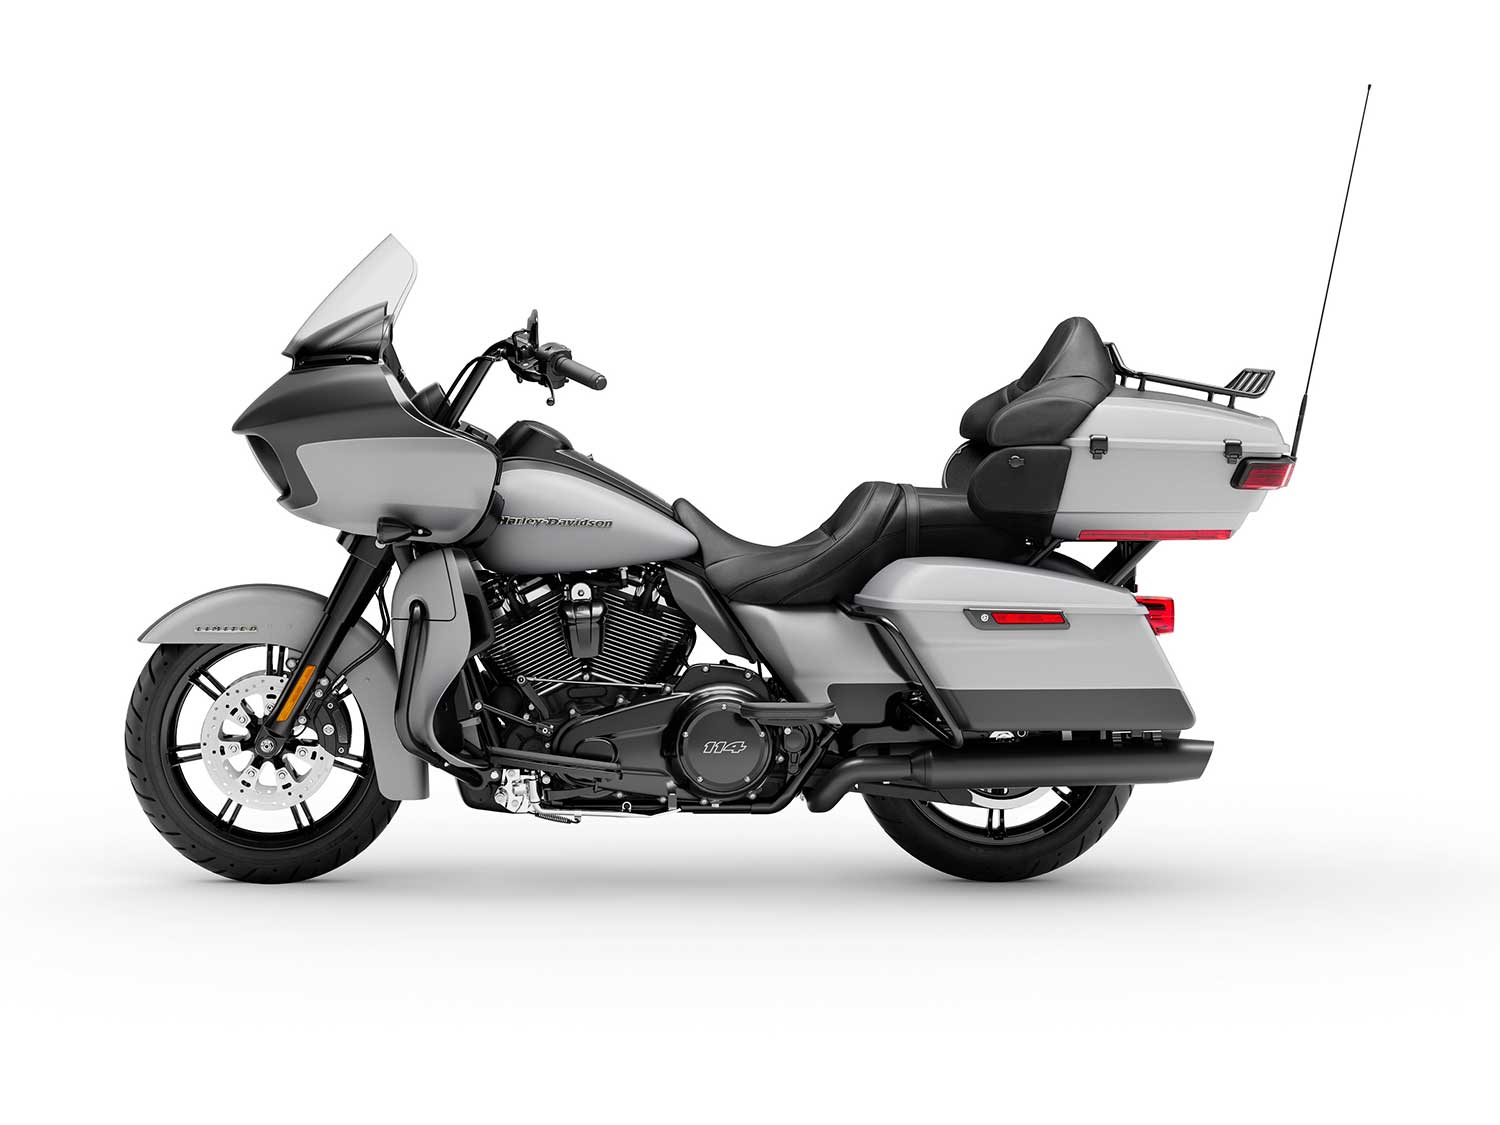 2020 Road Glide Ultra Limited Promotion Off70